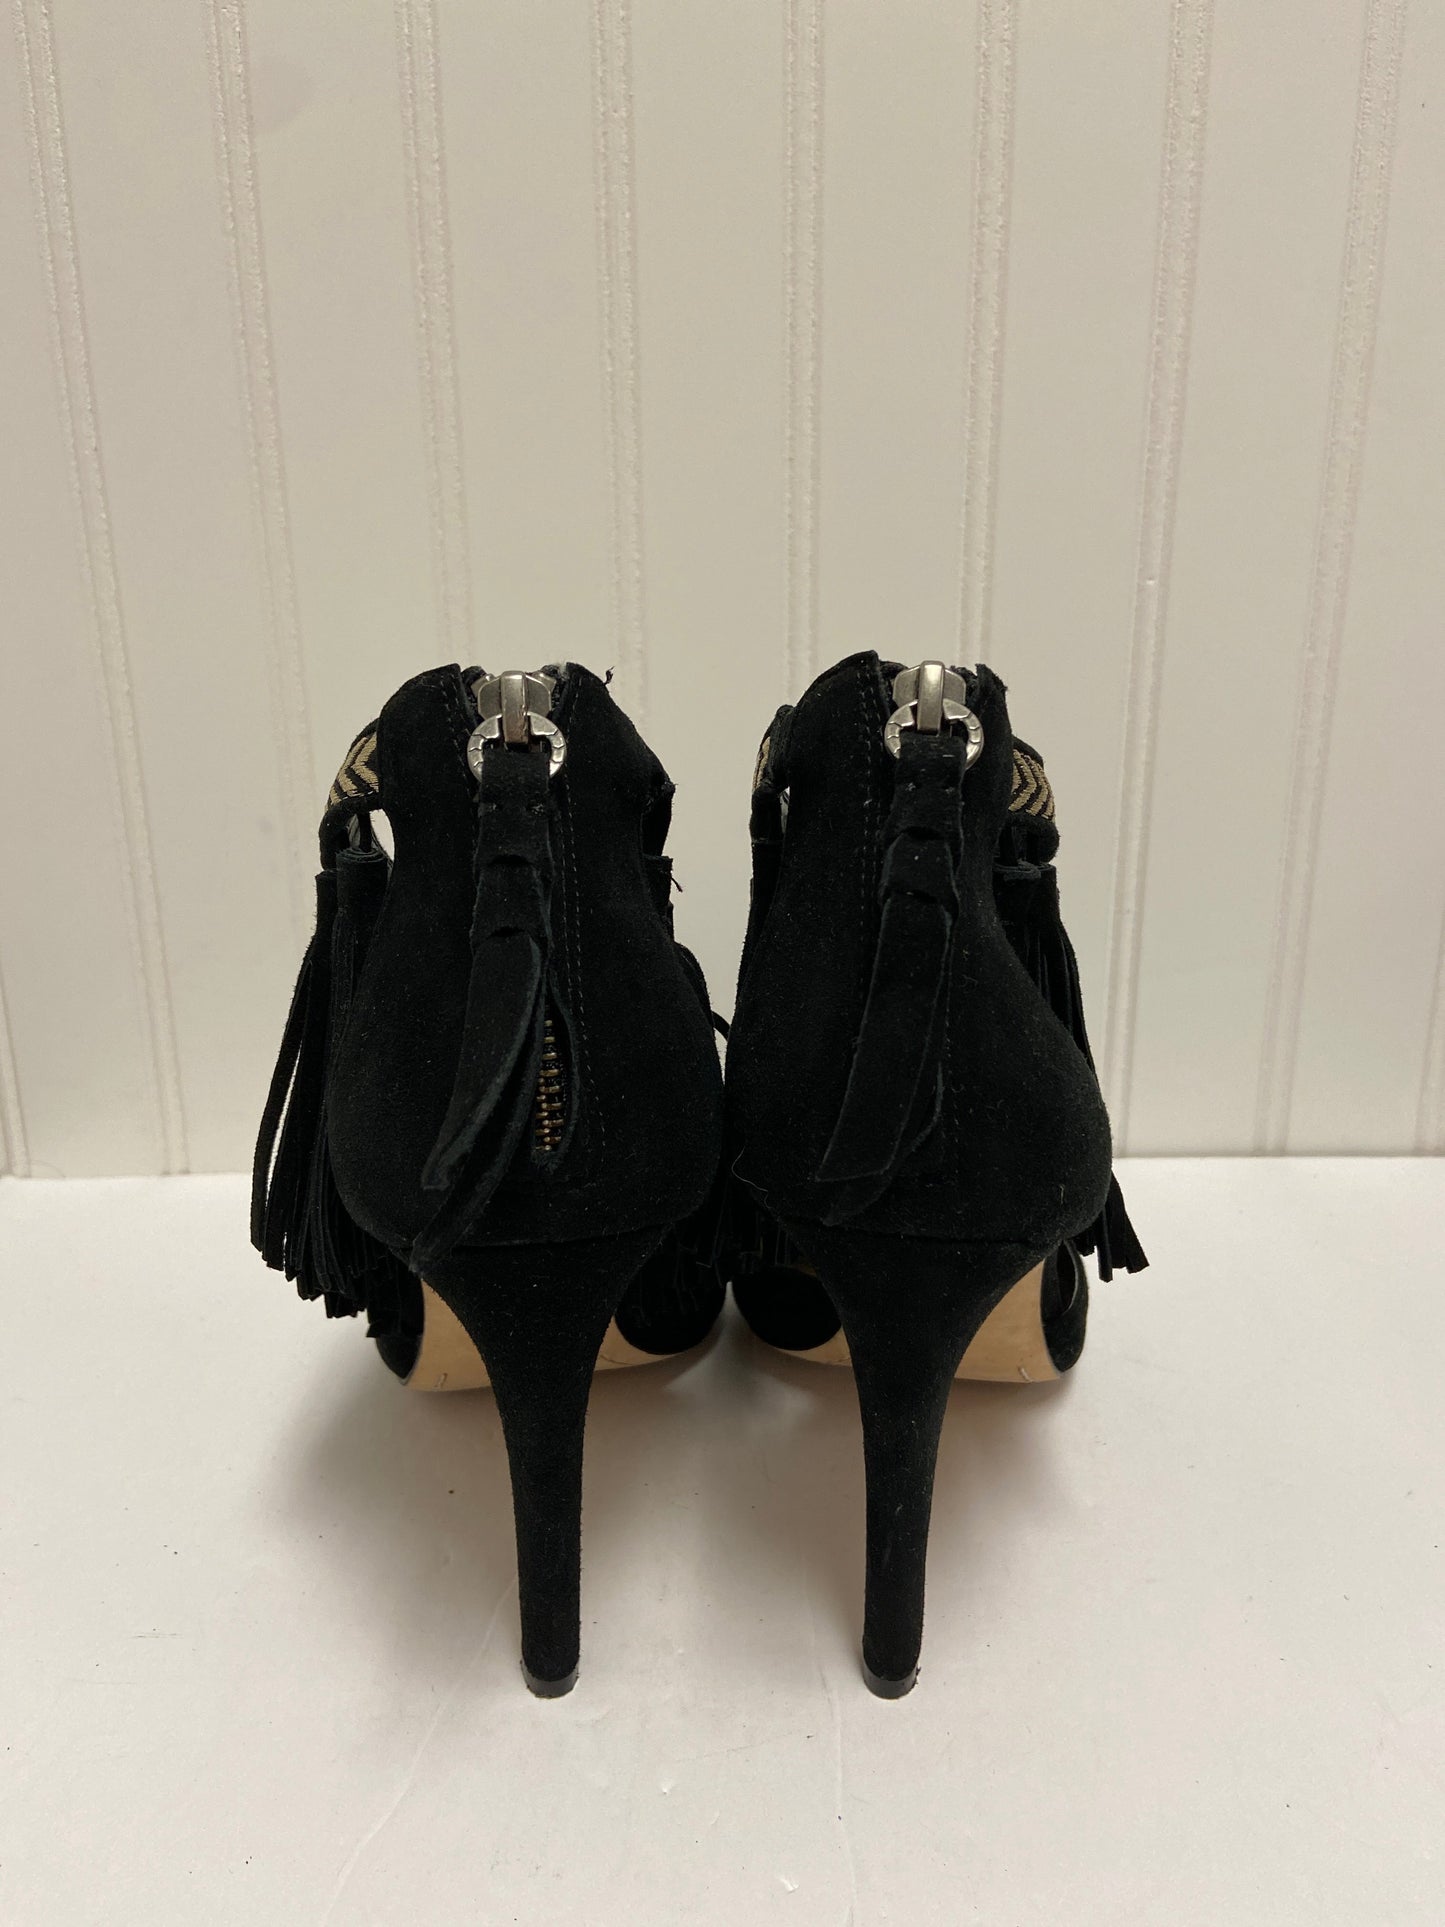 Shoes Heels Stiletto By Cmc  Size: 8.5